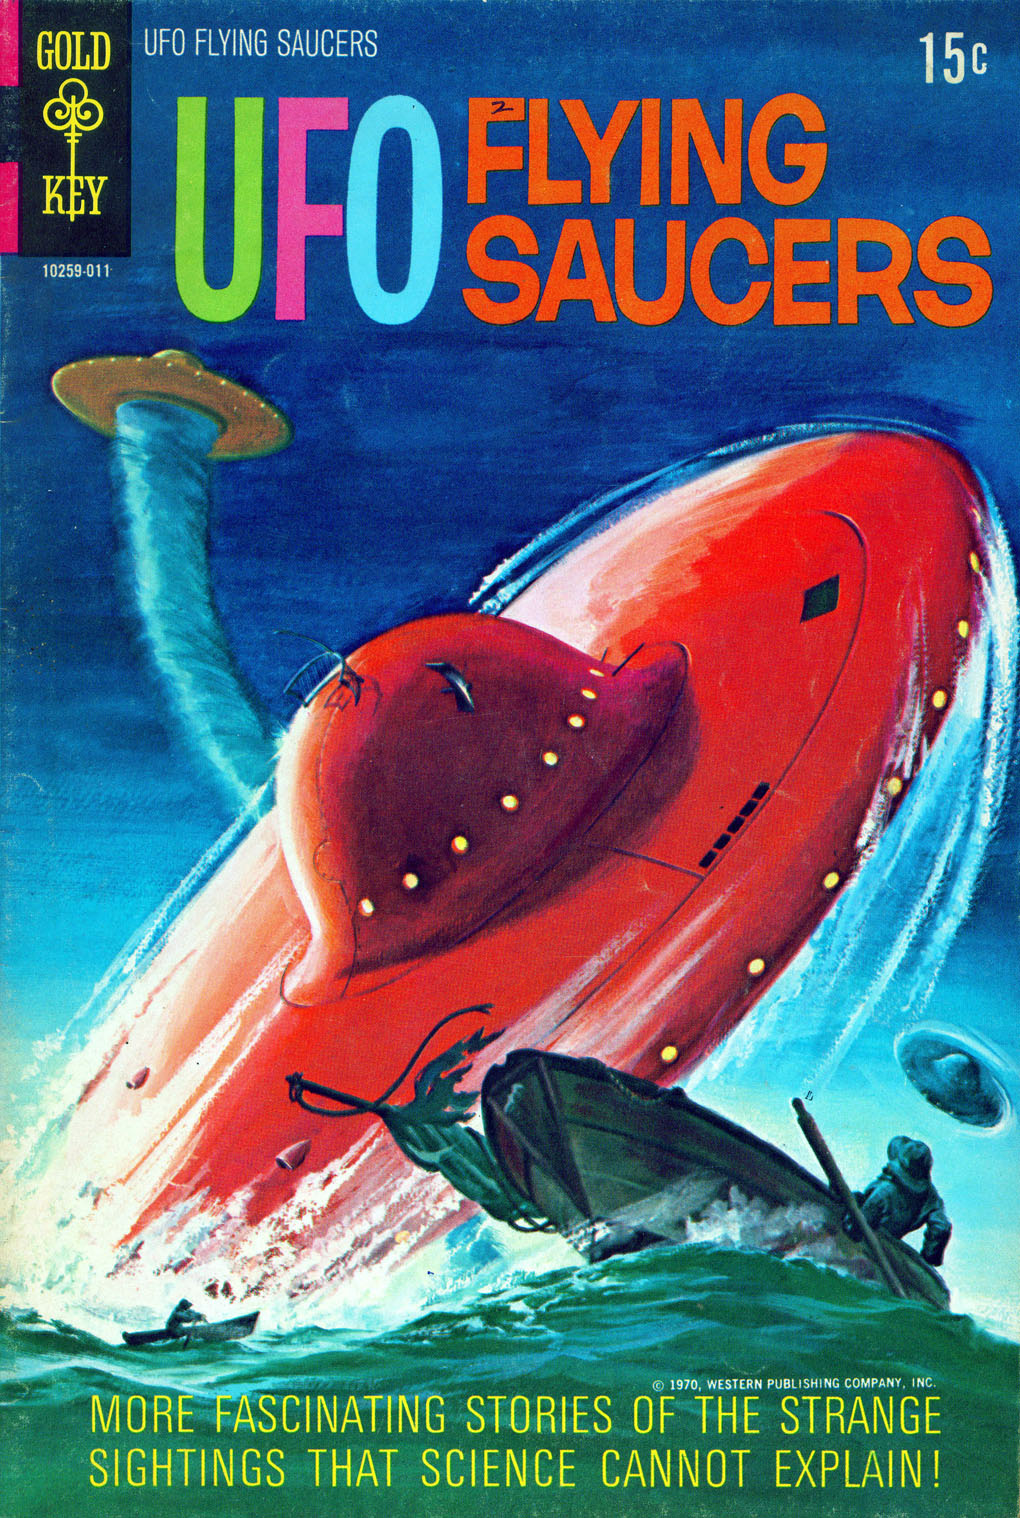 UFO Flying Saucers #2 (1968 Gold Key)